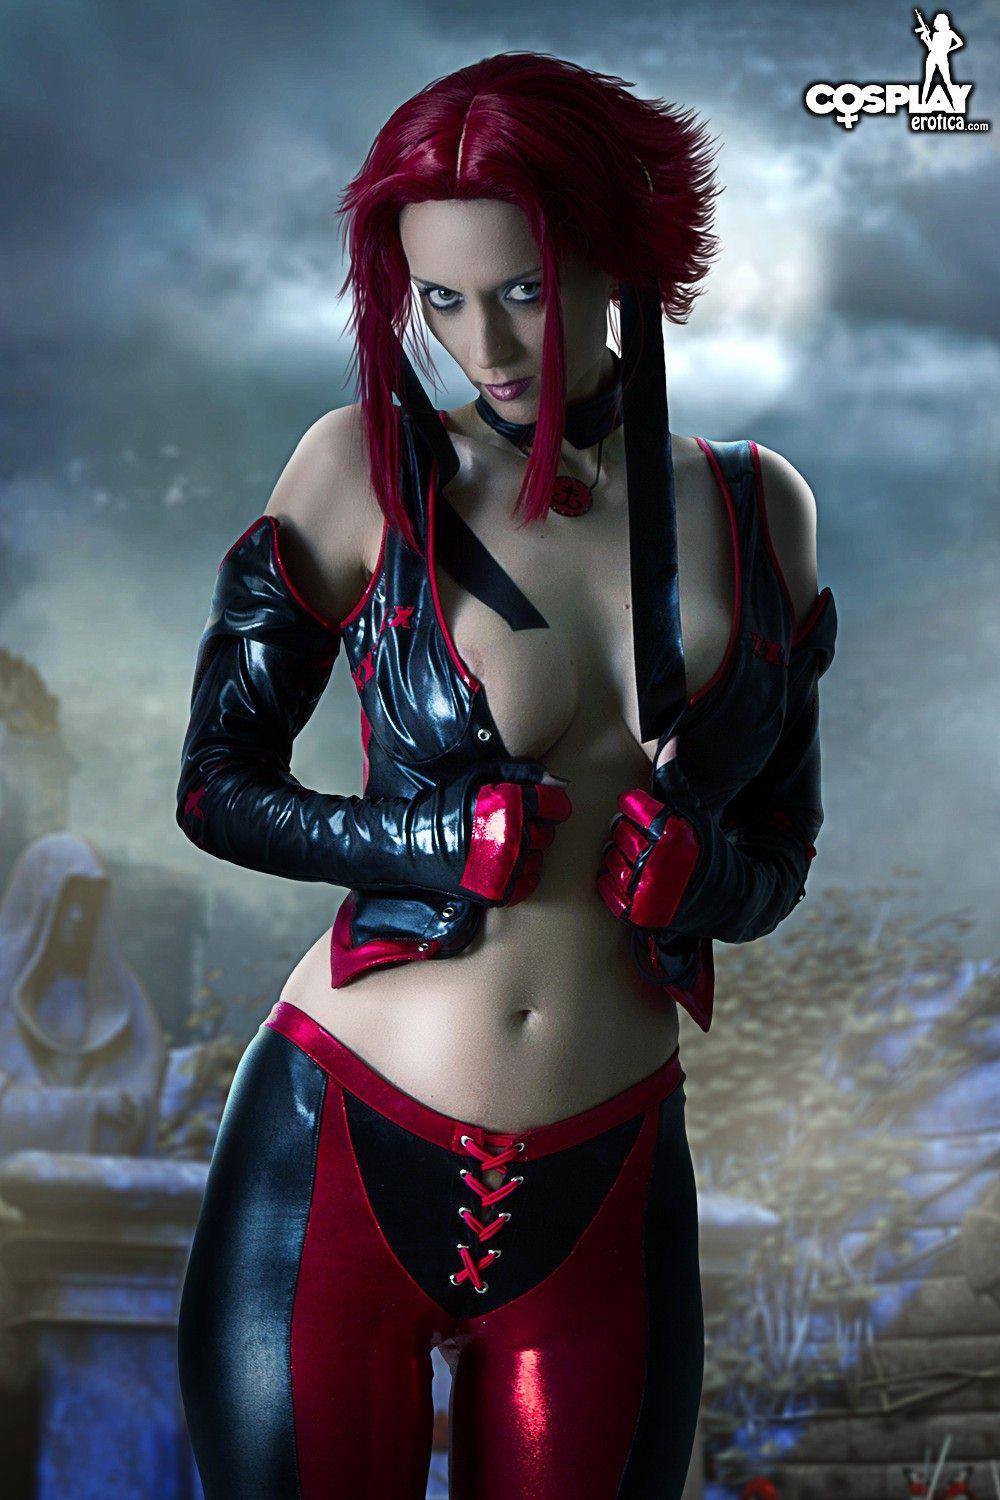 Pictures of sexy cosplayer Lana dressed as Bloodrayne #58815226